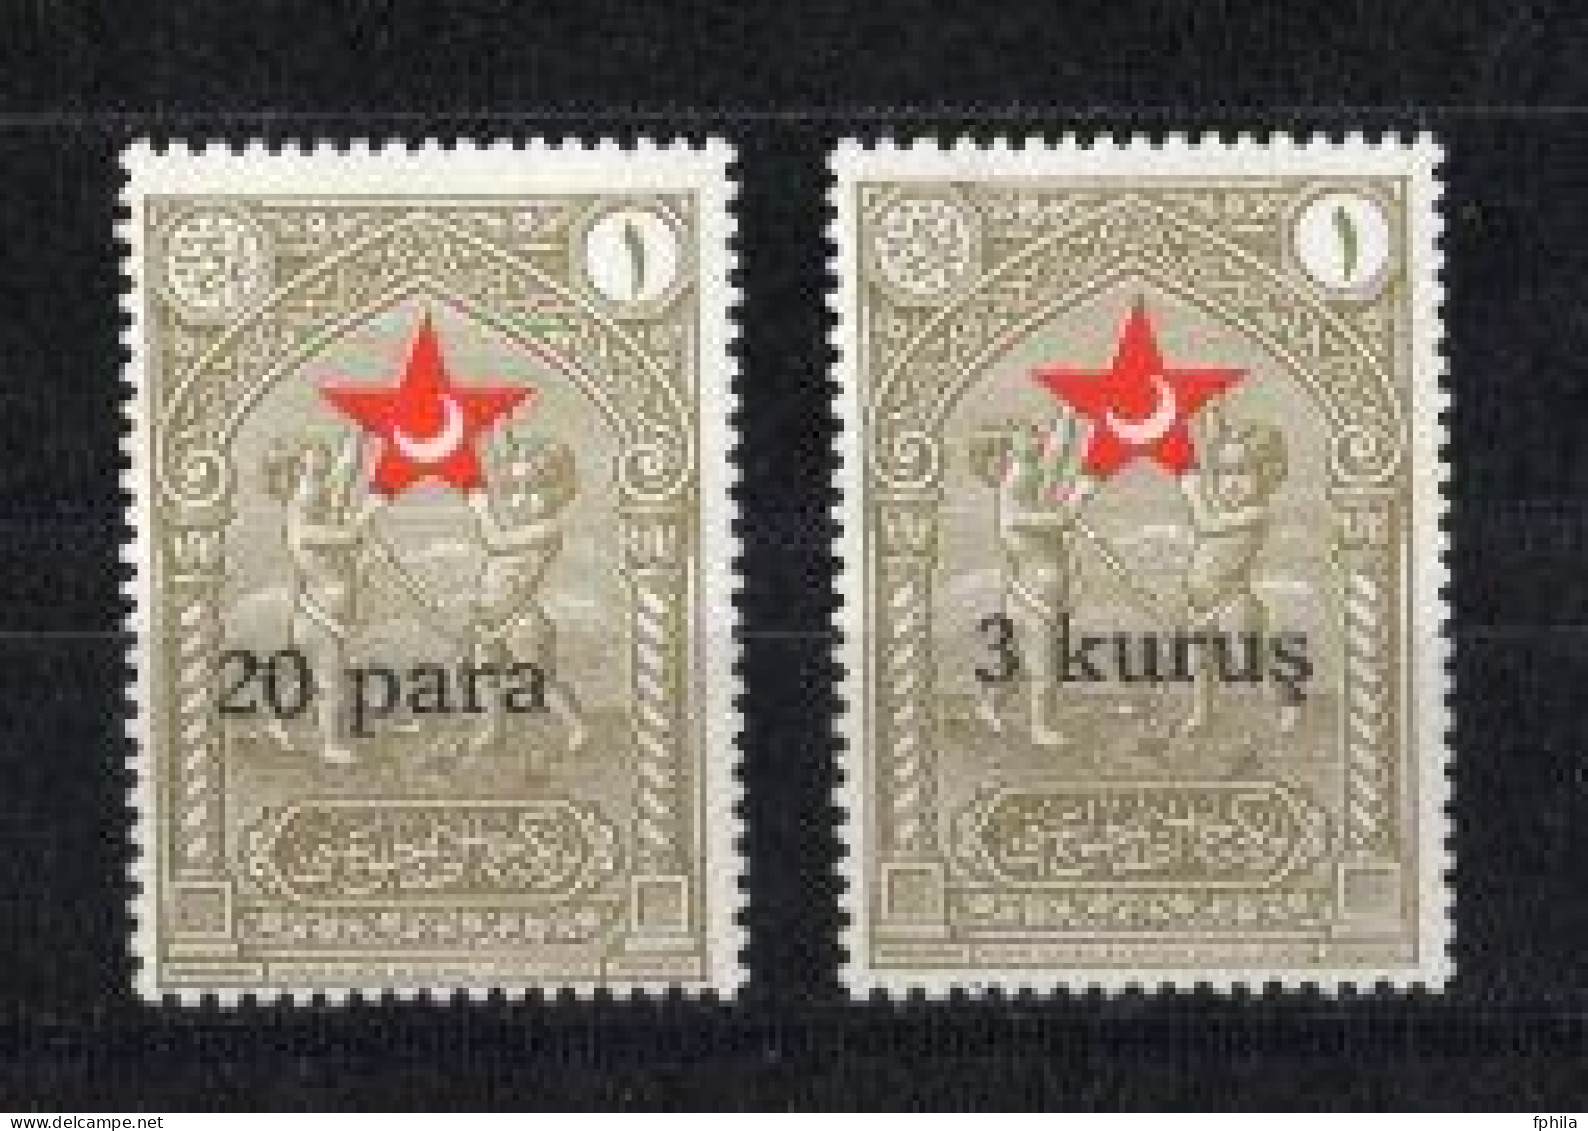 1932 TURKEY STAMPS IN AID OF THE TURKISH SOCIETY FOR THE PROTECTION OF CHILDREN SURCHARGED WITH LARGE LETTERS NO GUM - Wohlfahrtsmarken